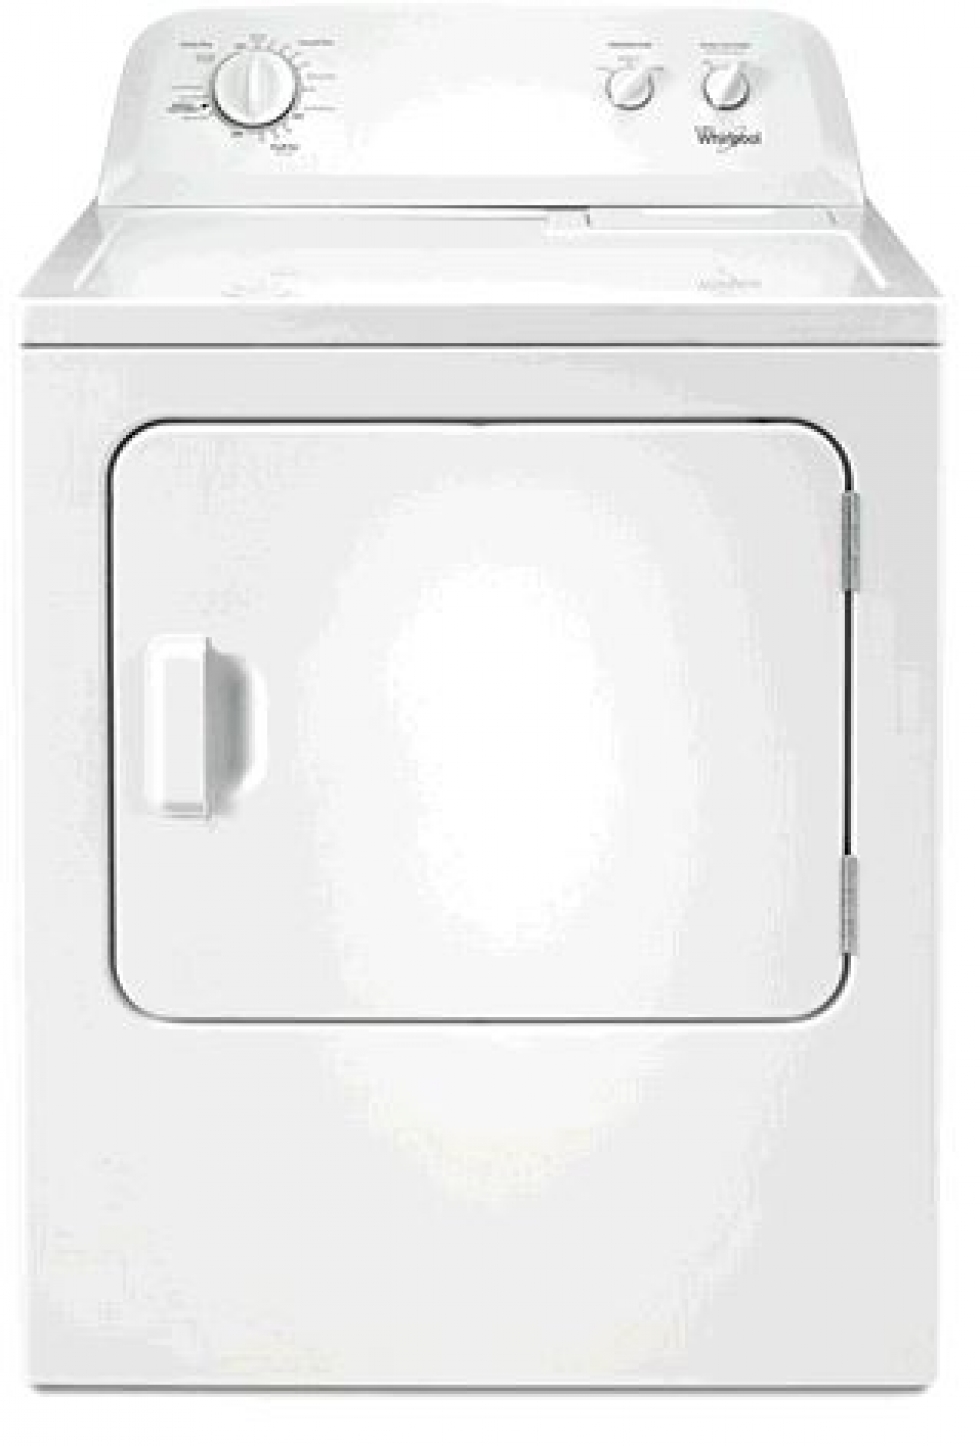 7.0 cu. ft. Top Load Paired Dryer with the Wrinkle Shield™ option